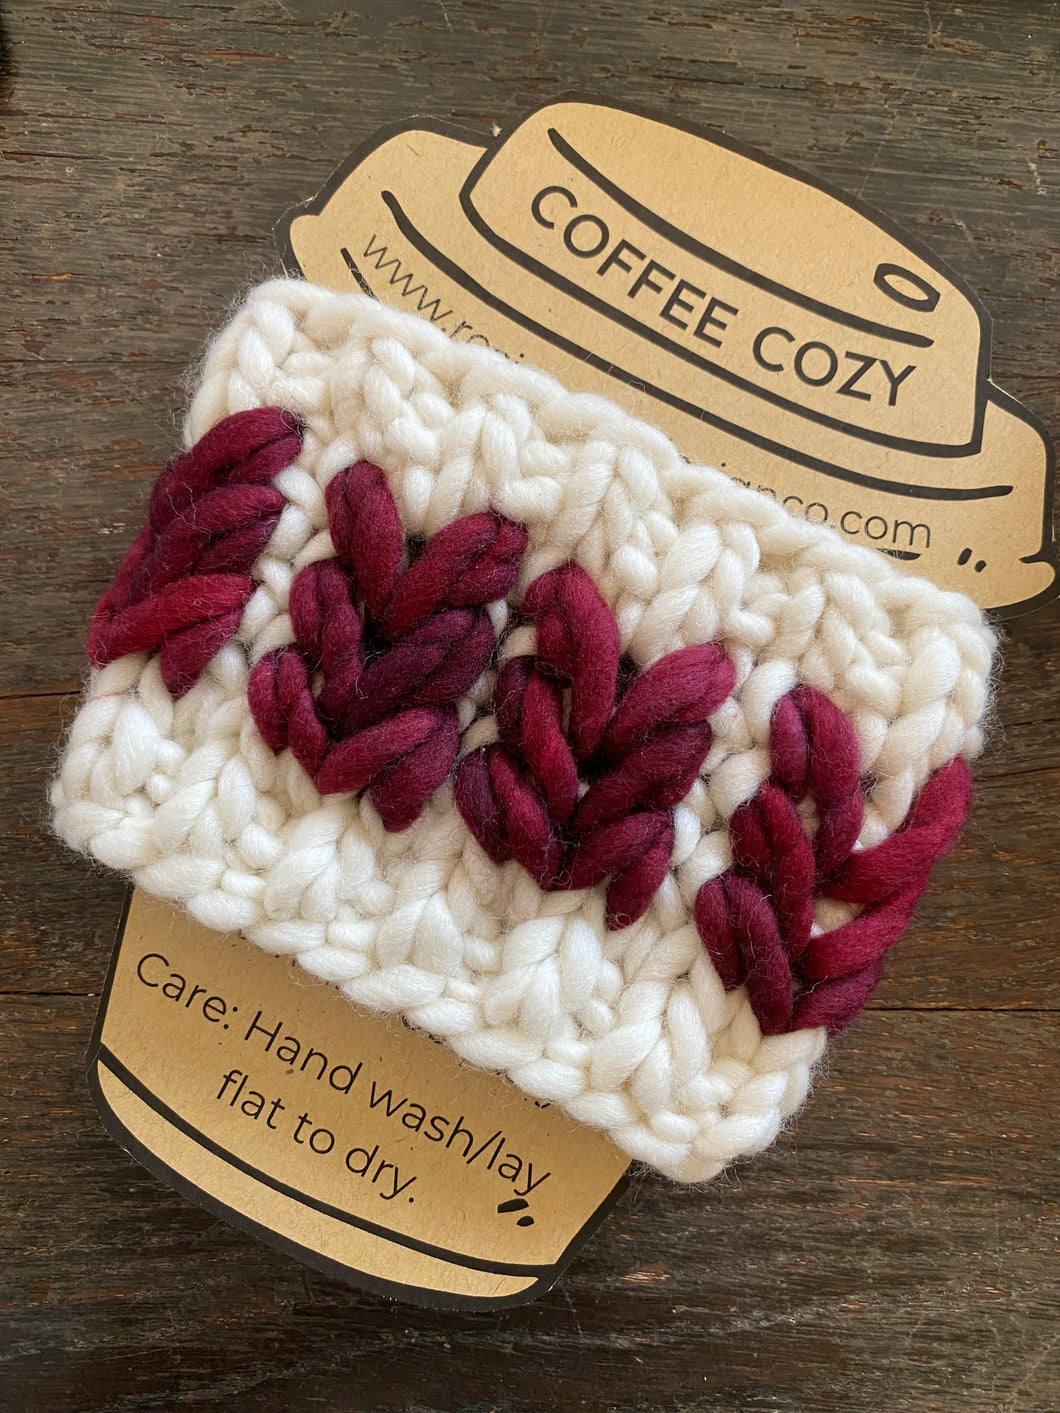 Luxury coffee cozies hearts valentine galentine gifts cute eco friendly coffee lover vday